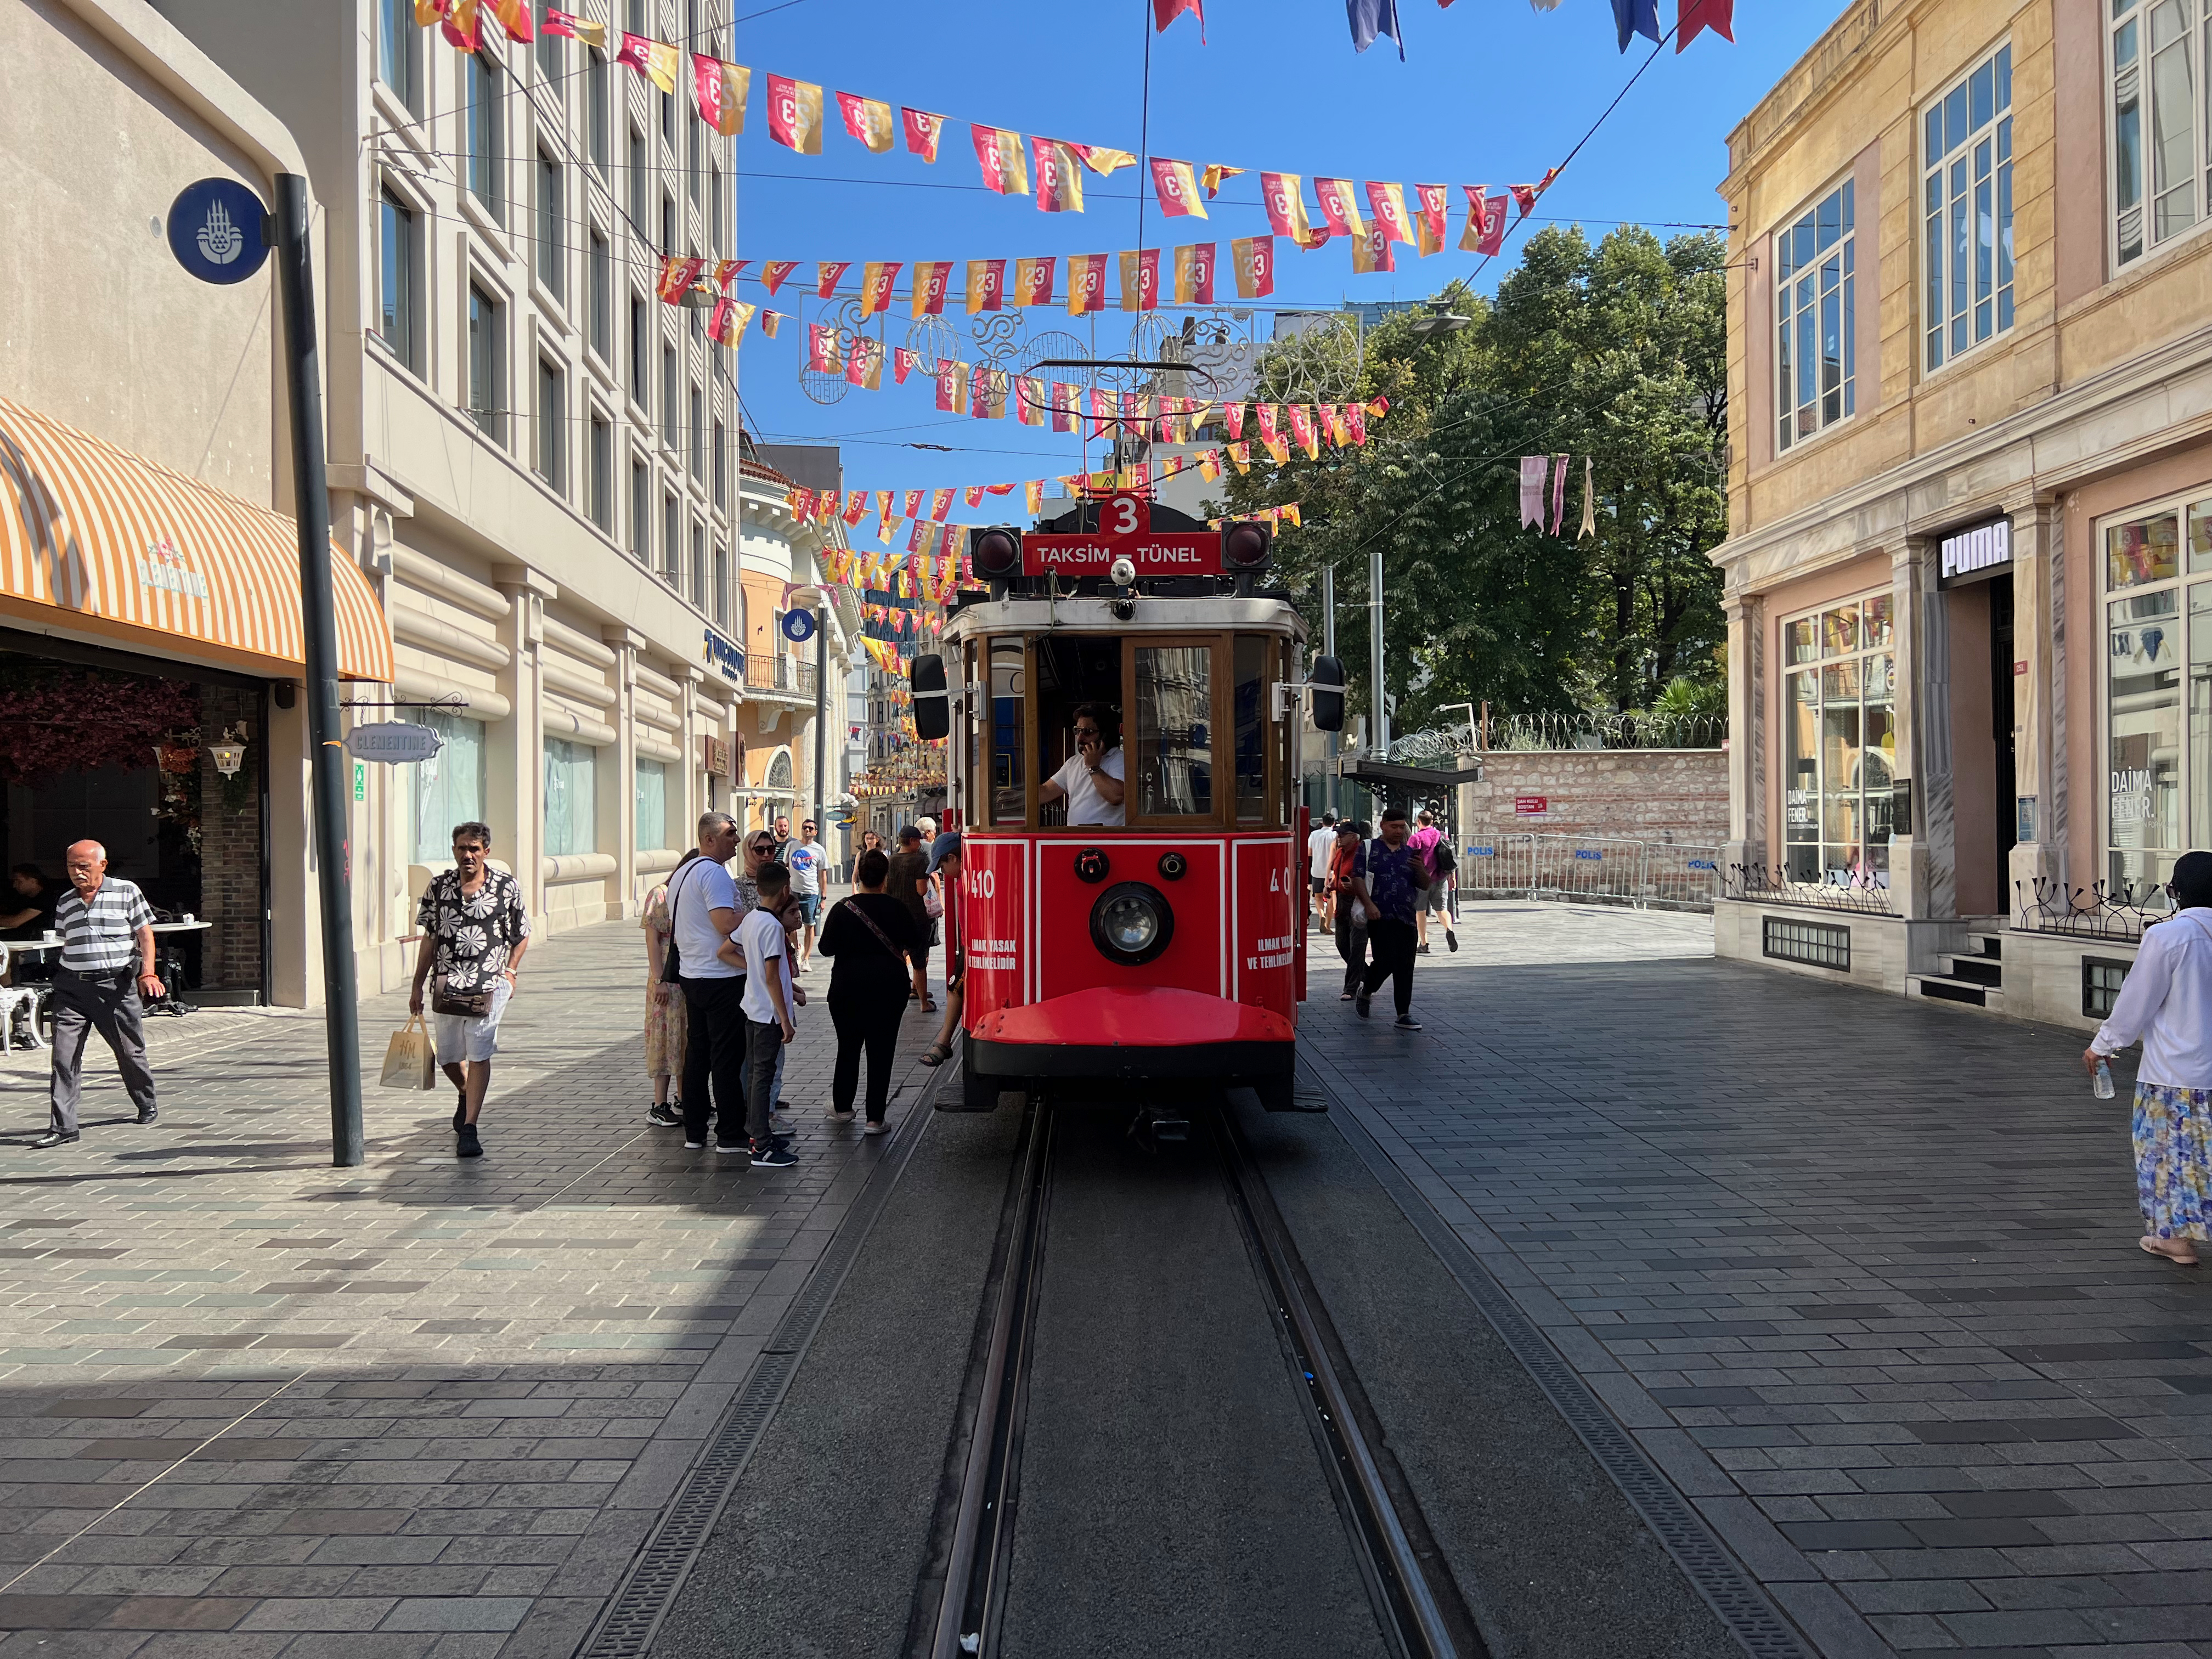 Histoic Tram in the İstiklal Caddesi